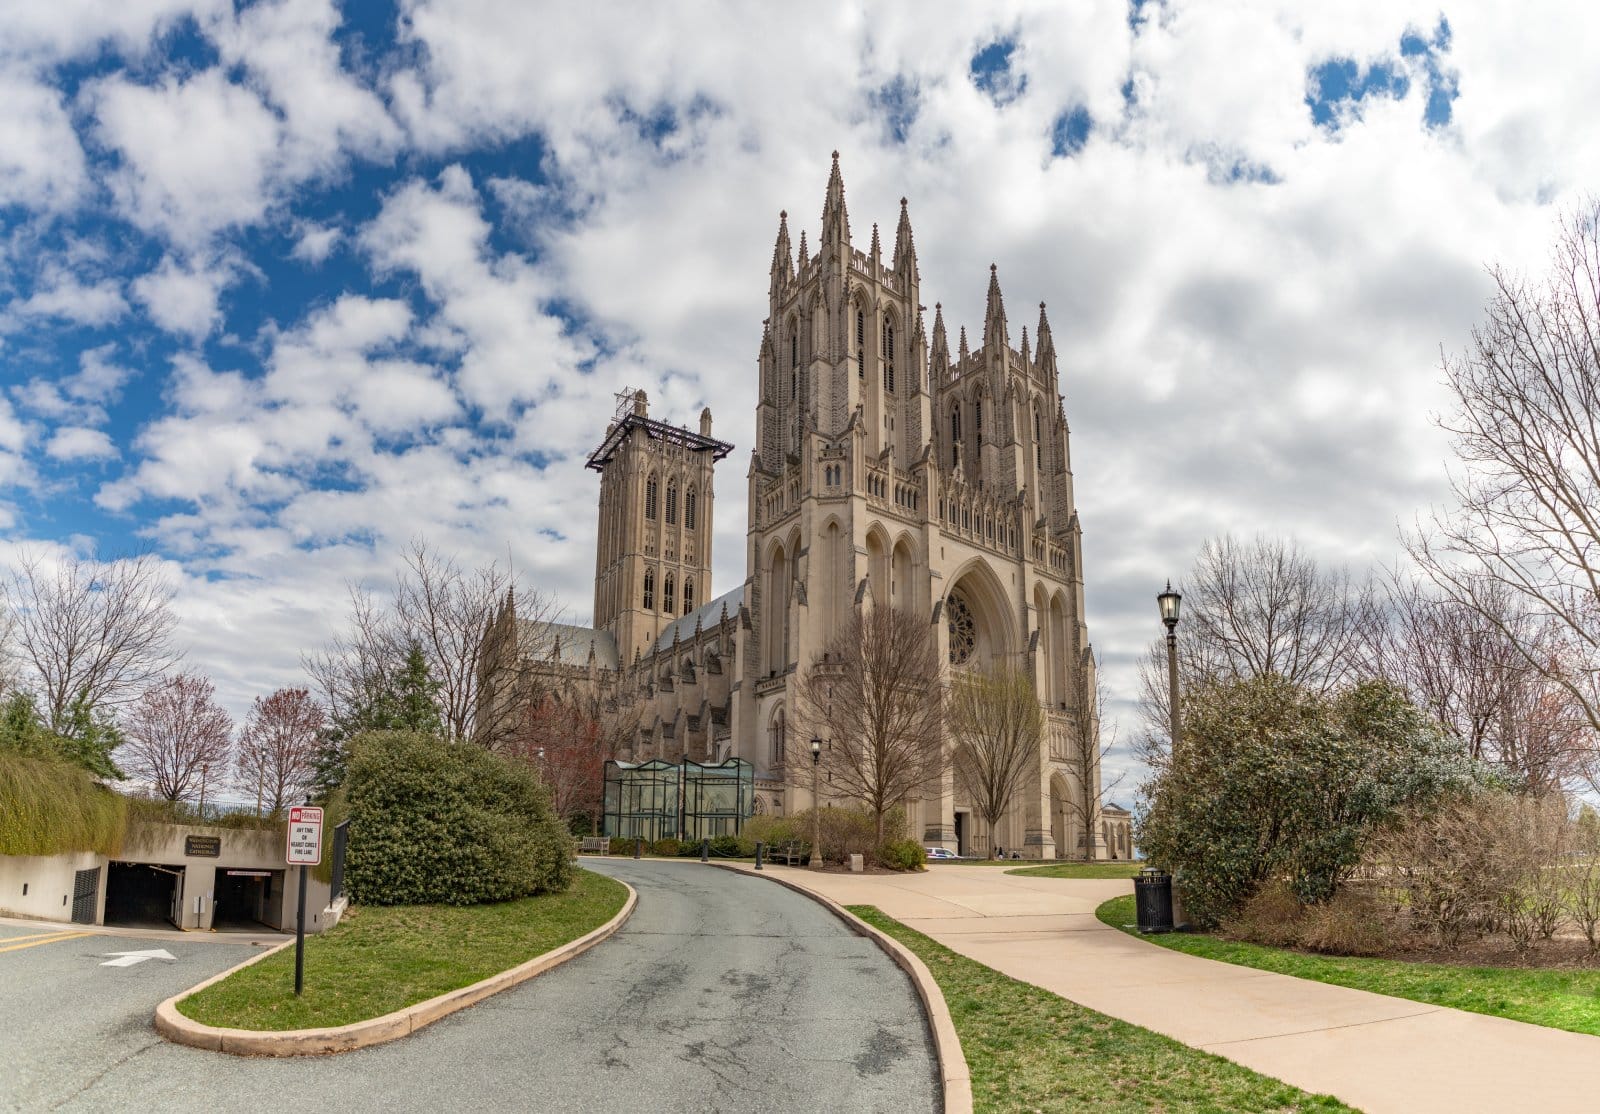 Image Credit: Shutterstock / brunocoelho <p><span>This Gothic masterpiece isn’t just an architectural wonder; it’s a beacon of unity and faith. Hosting presidential funerals and national prayer services, it stands as a symbol of the country’s Christian foundation.</span></p>